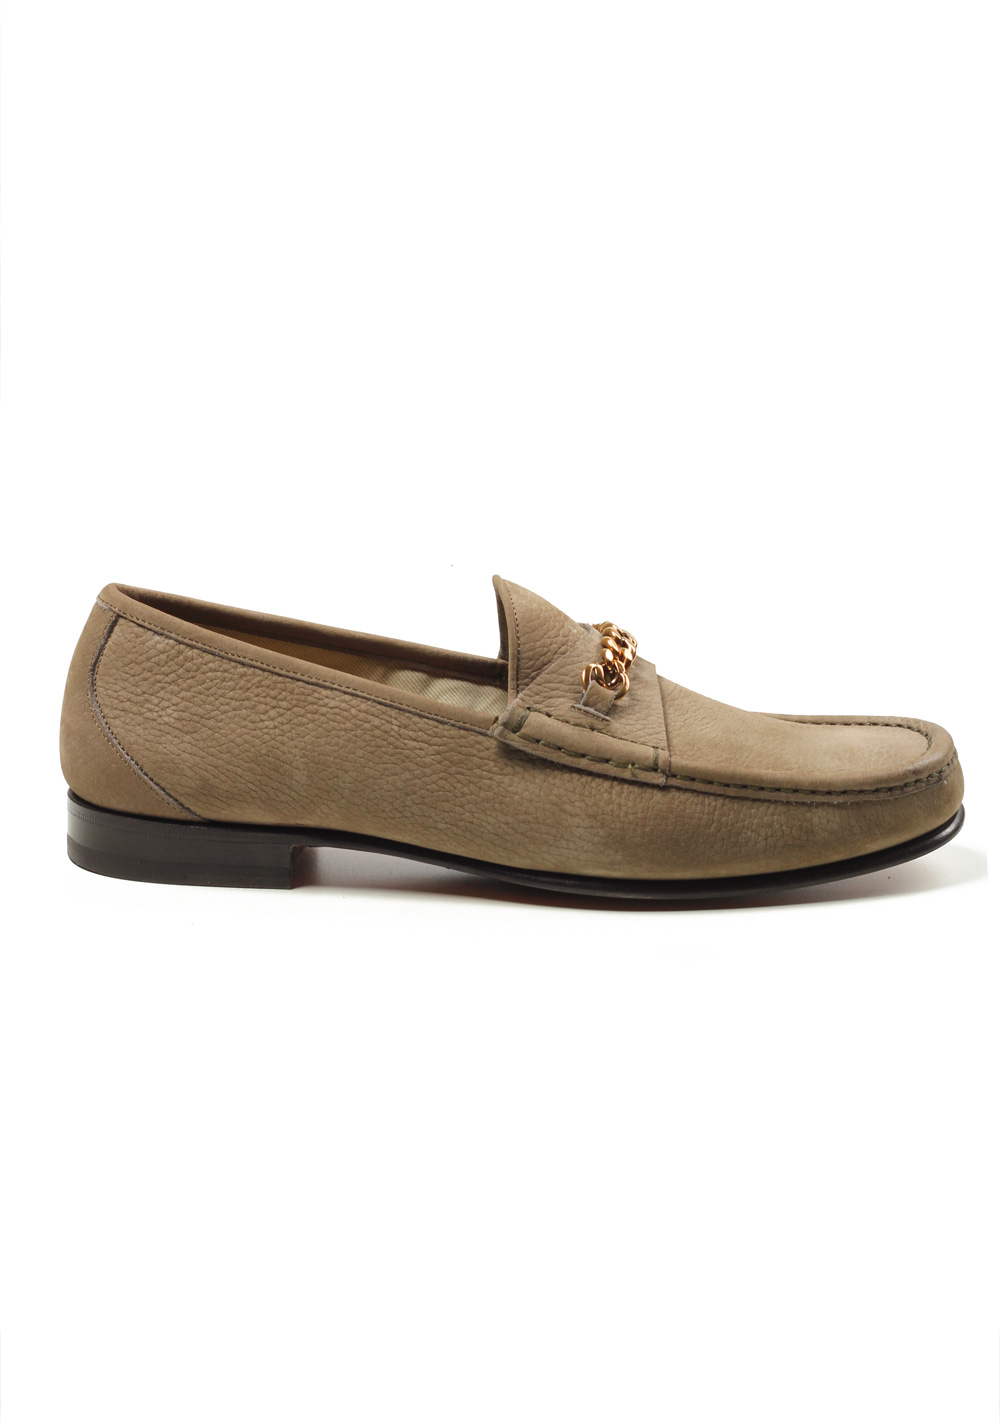 TOM FORD York Beige Nubuck Leather Chain Loafers Shoes Size 7,5 UK / 8,5 U.S. | Costume Limité